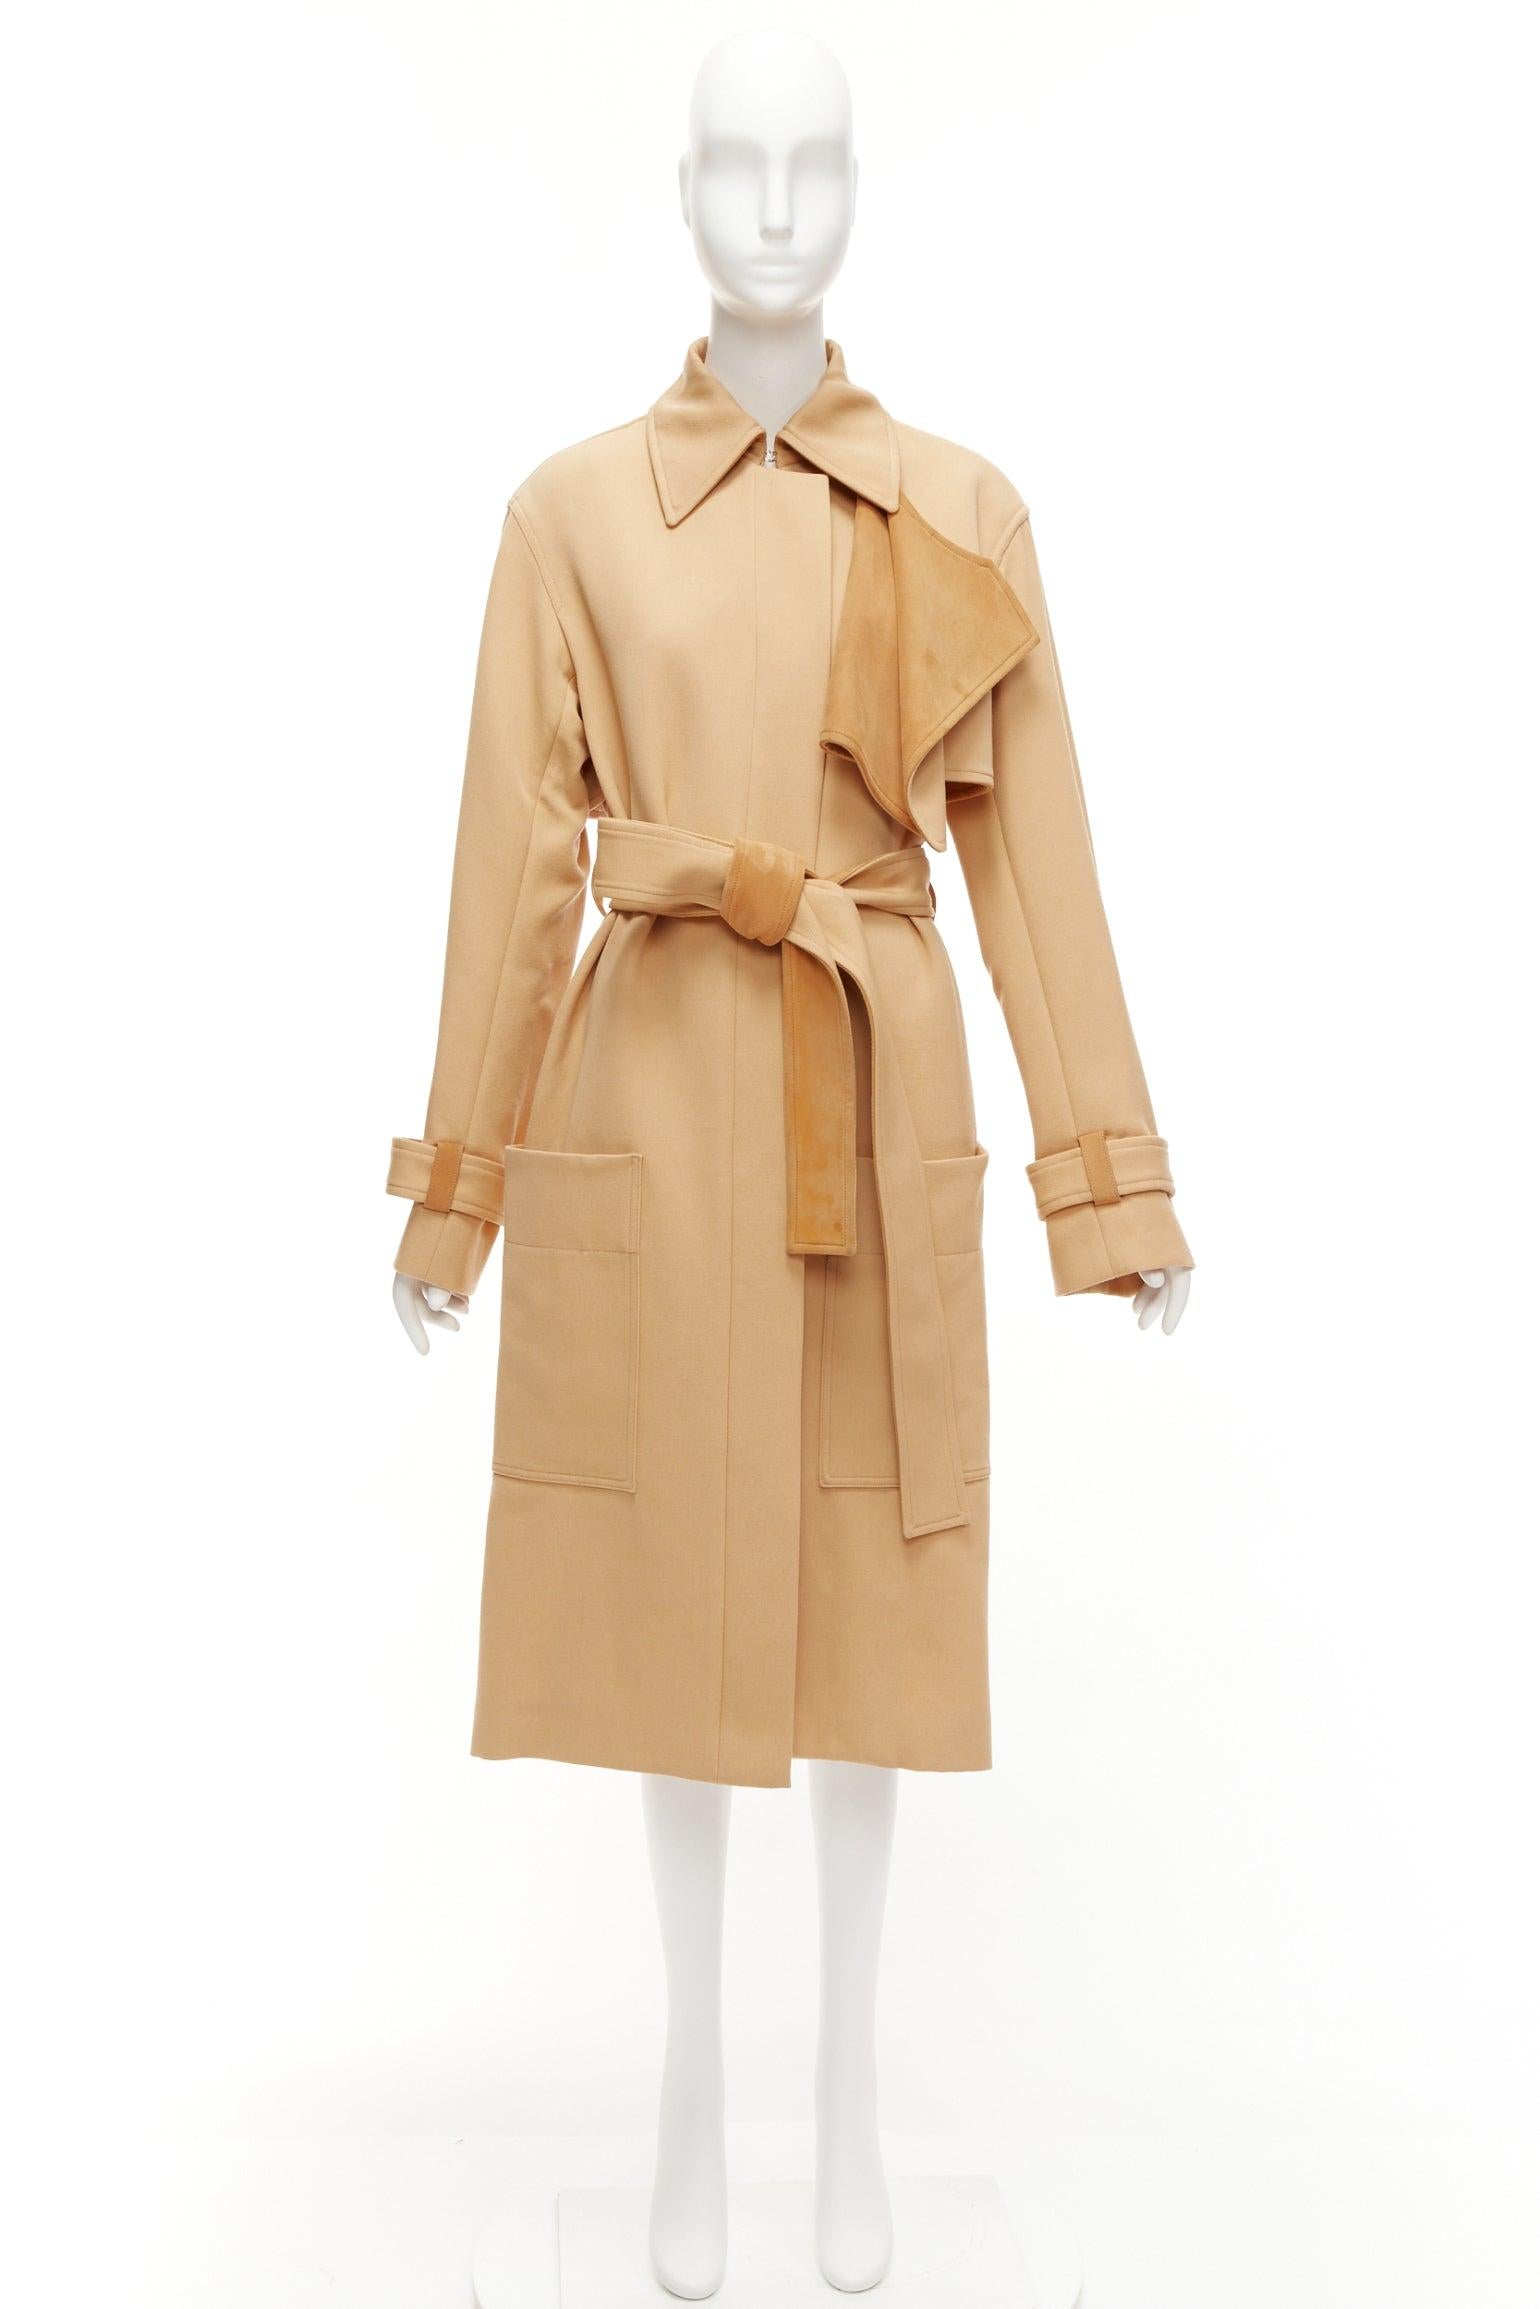 OLD CELINE Phoebe Philo wool goat leather trimmed deconstructed trench coat FR38 For Sale 6